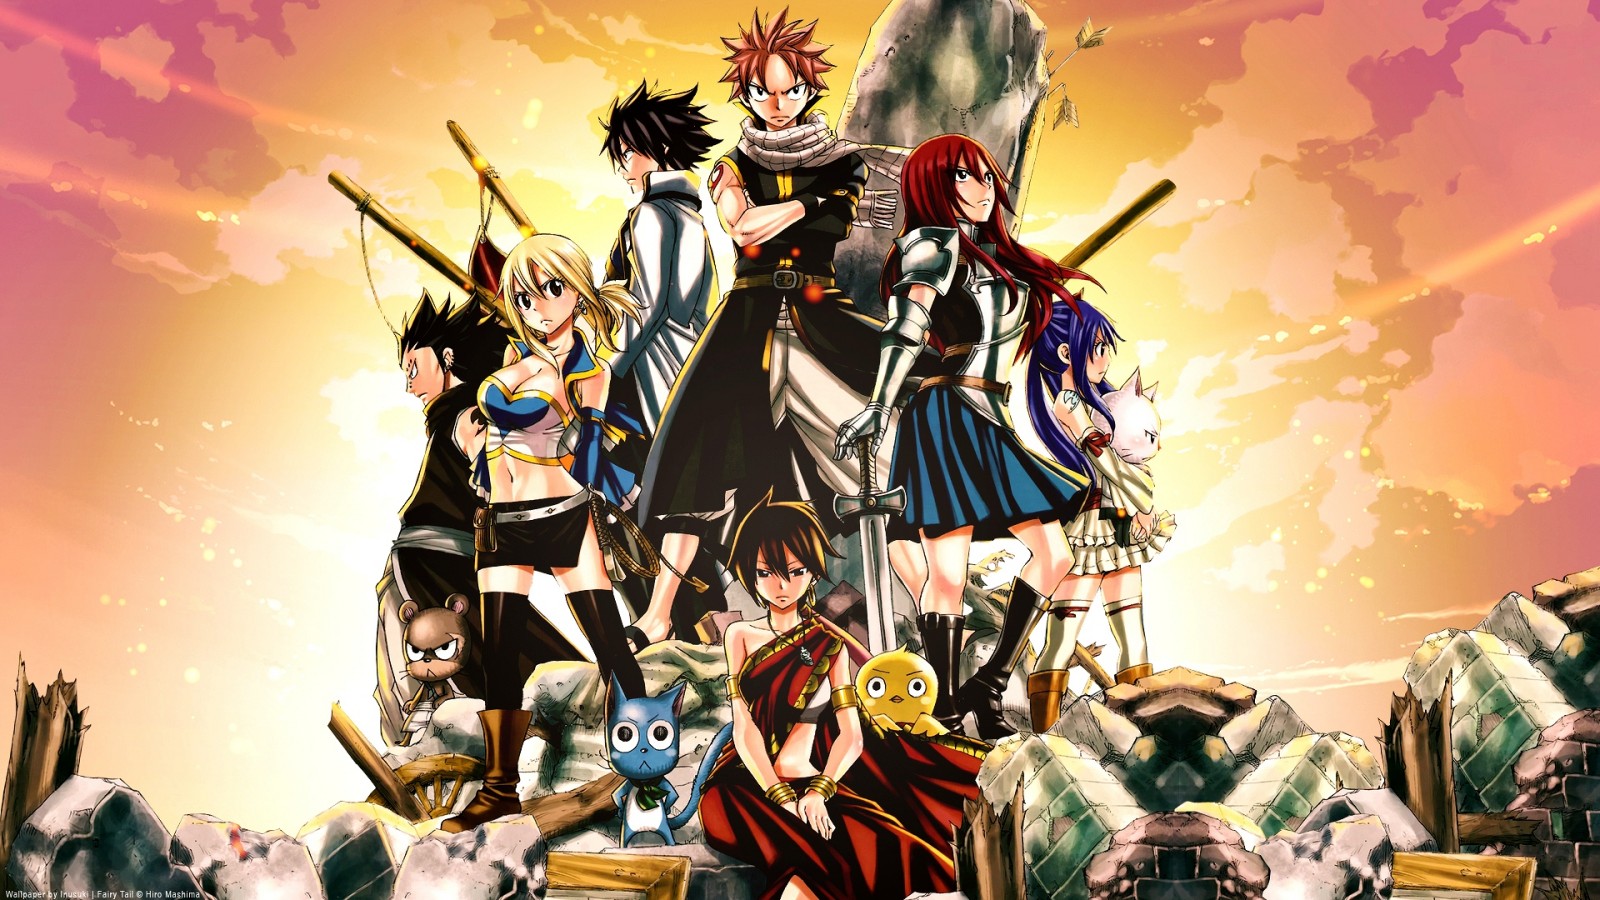 Download Fairy Tail Light Hd Wallpaper Full HD Wallpapers